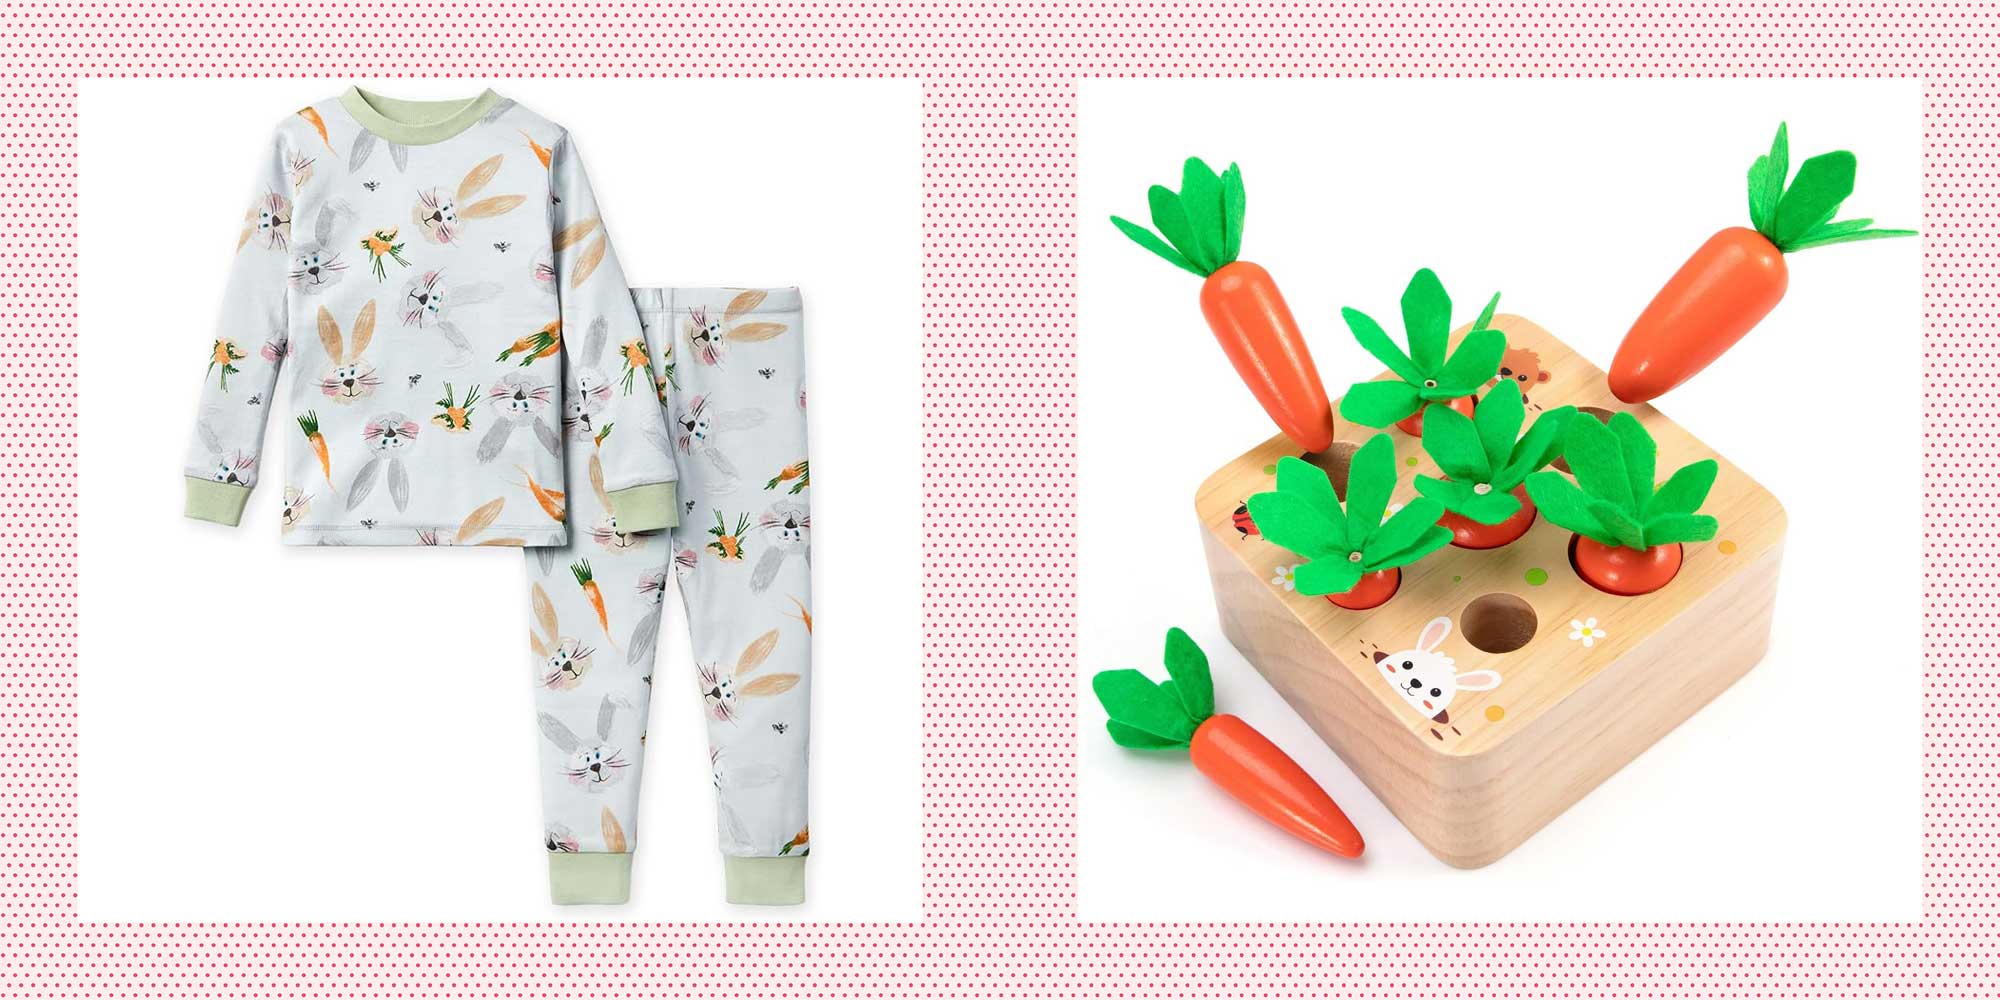 30 Toddler Easter Gifts That Are as Adorable as Your Little One